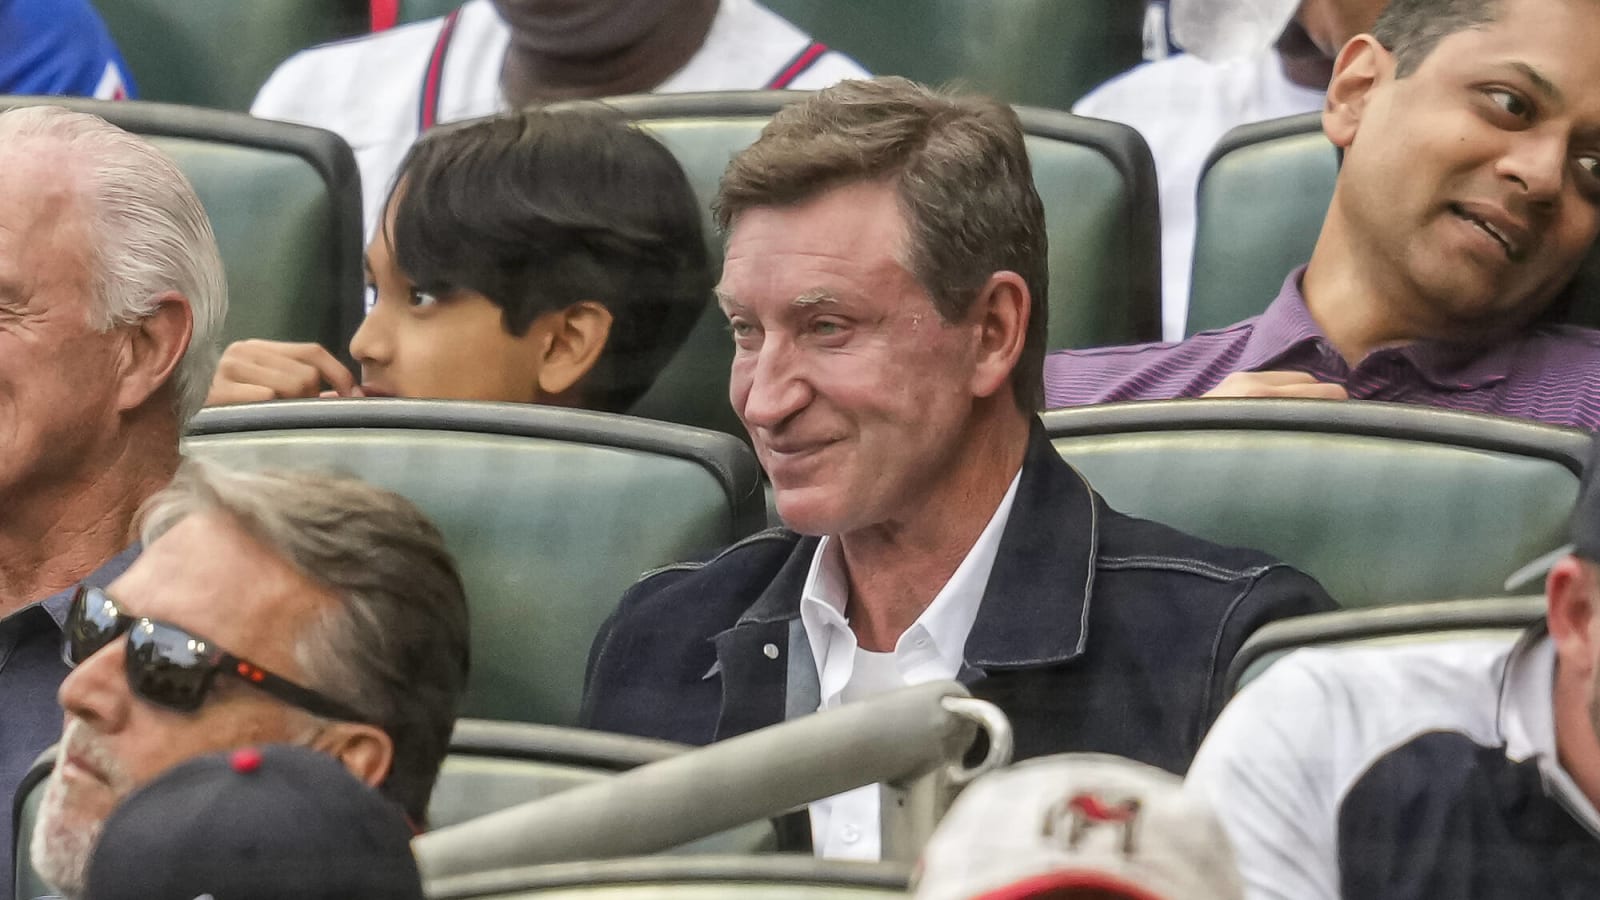 Gretzky Says He Turned Down Insane Offer to Join Canucks in 80s